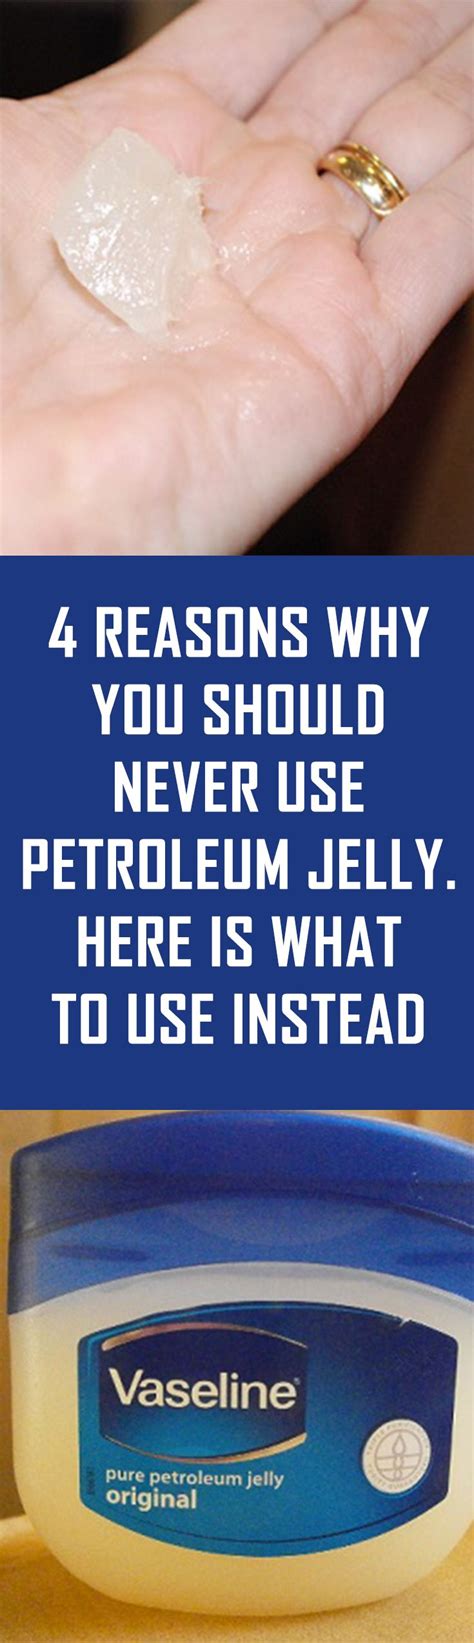 Why shouldn't you use petroleum jelly on your face?